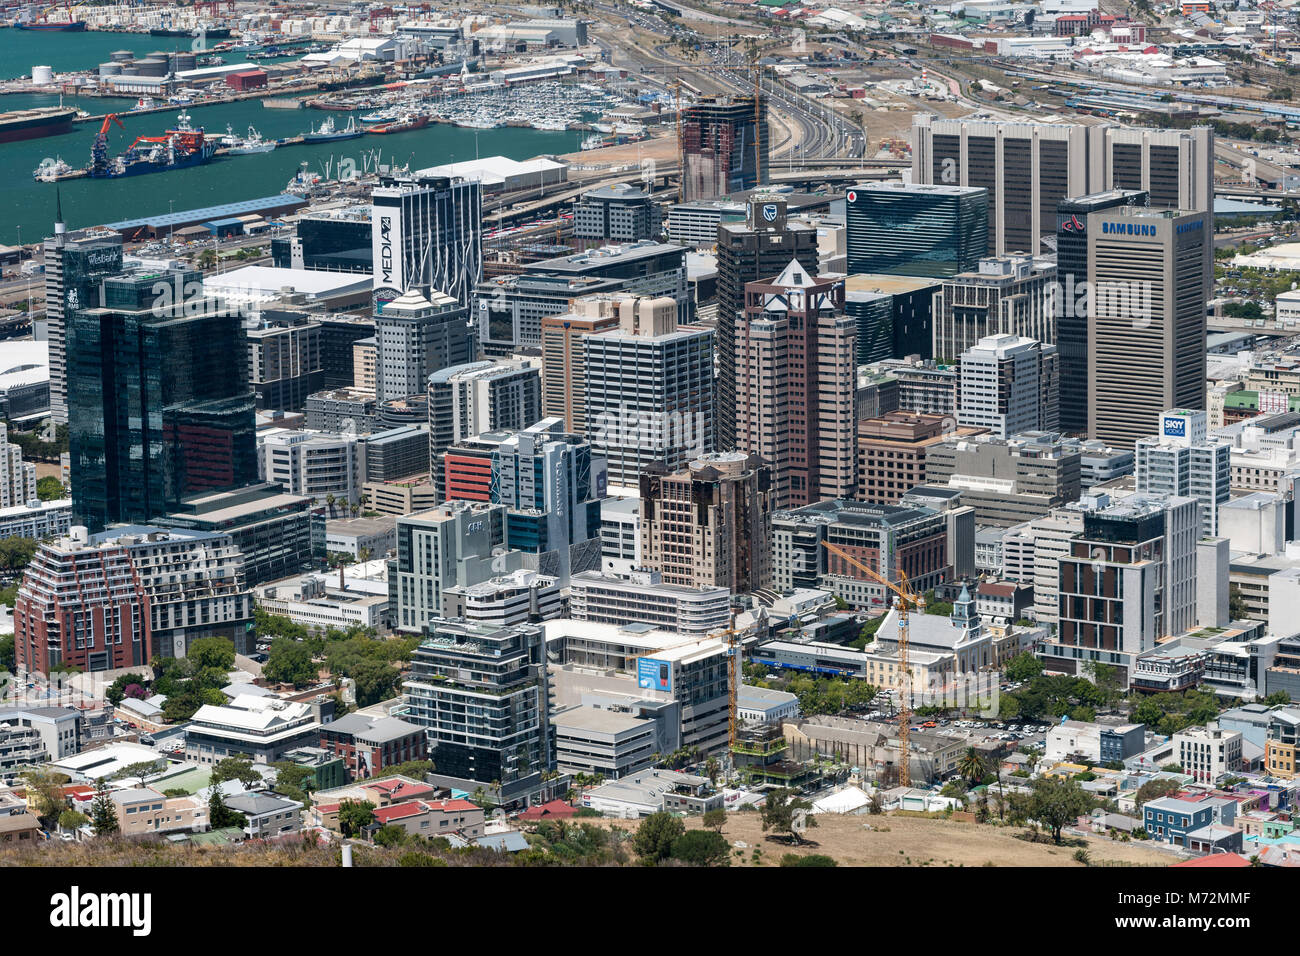 The Cape Town CBD in South Africa. Stock Photo